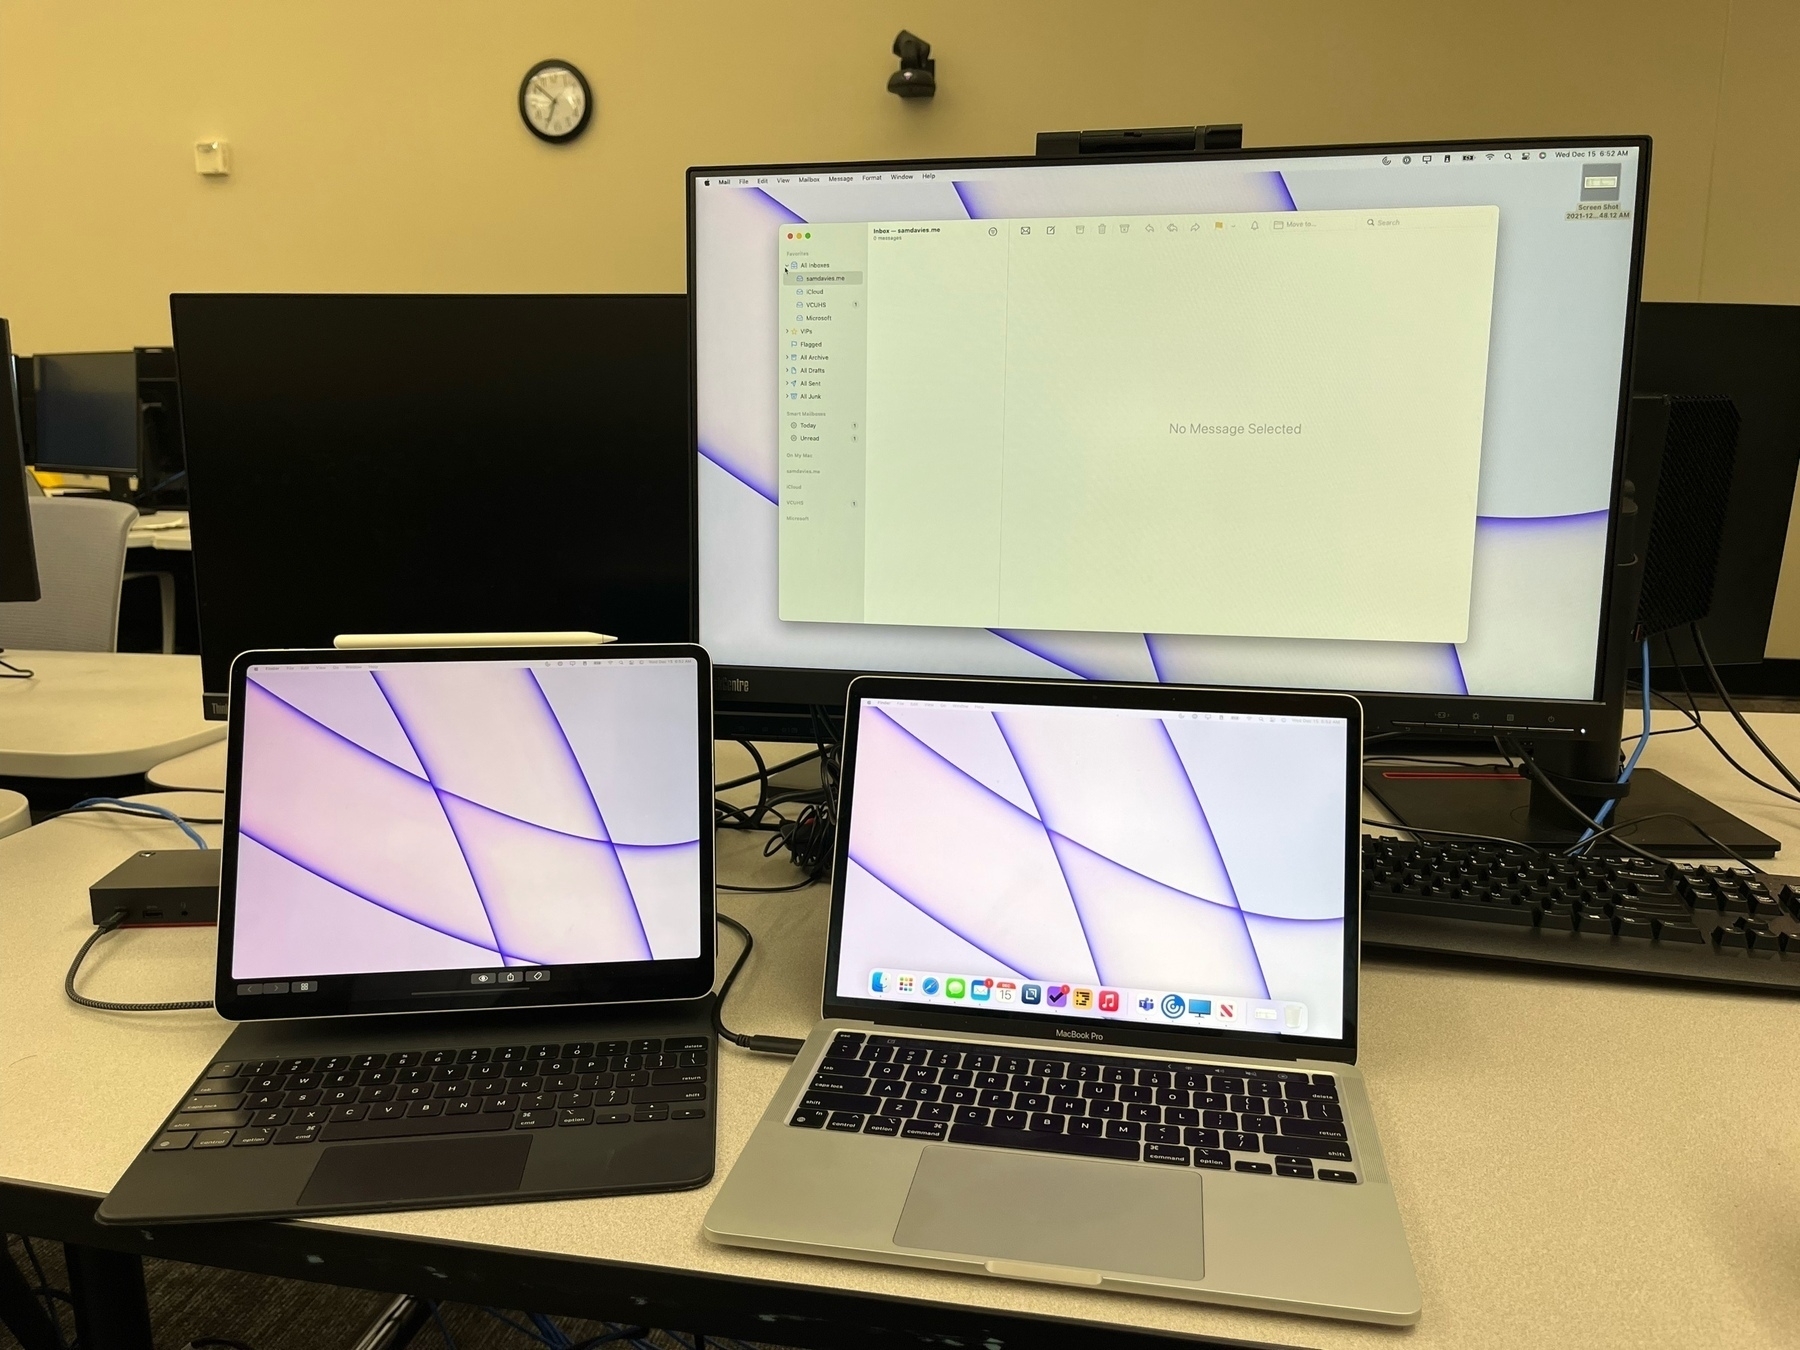 A 12.9" iPad Pro shows the macOS desktop alongside a MacBook Pro and ThinkCentre monitor